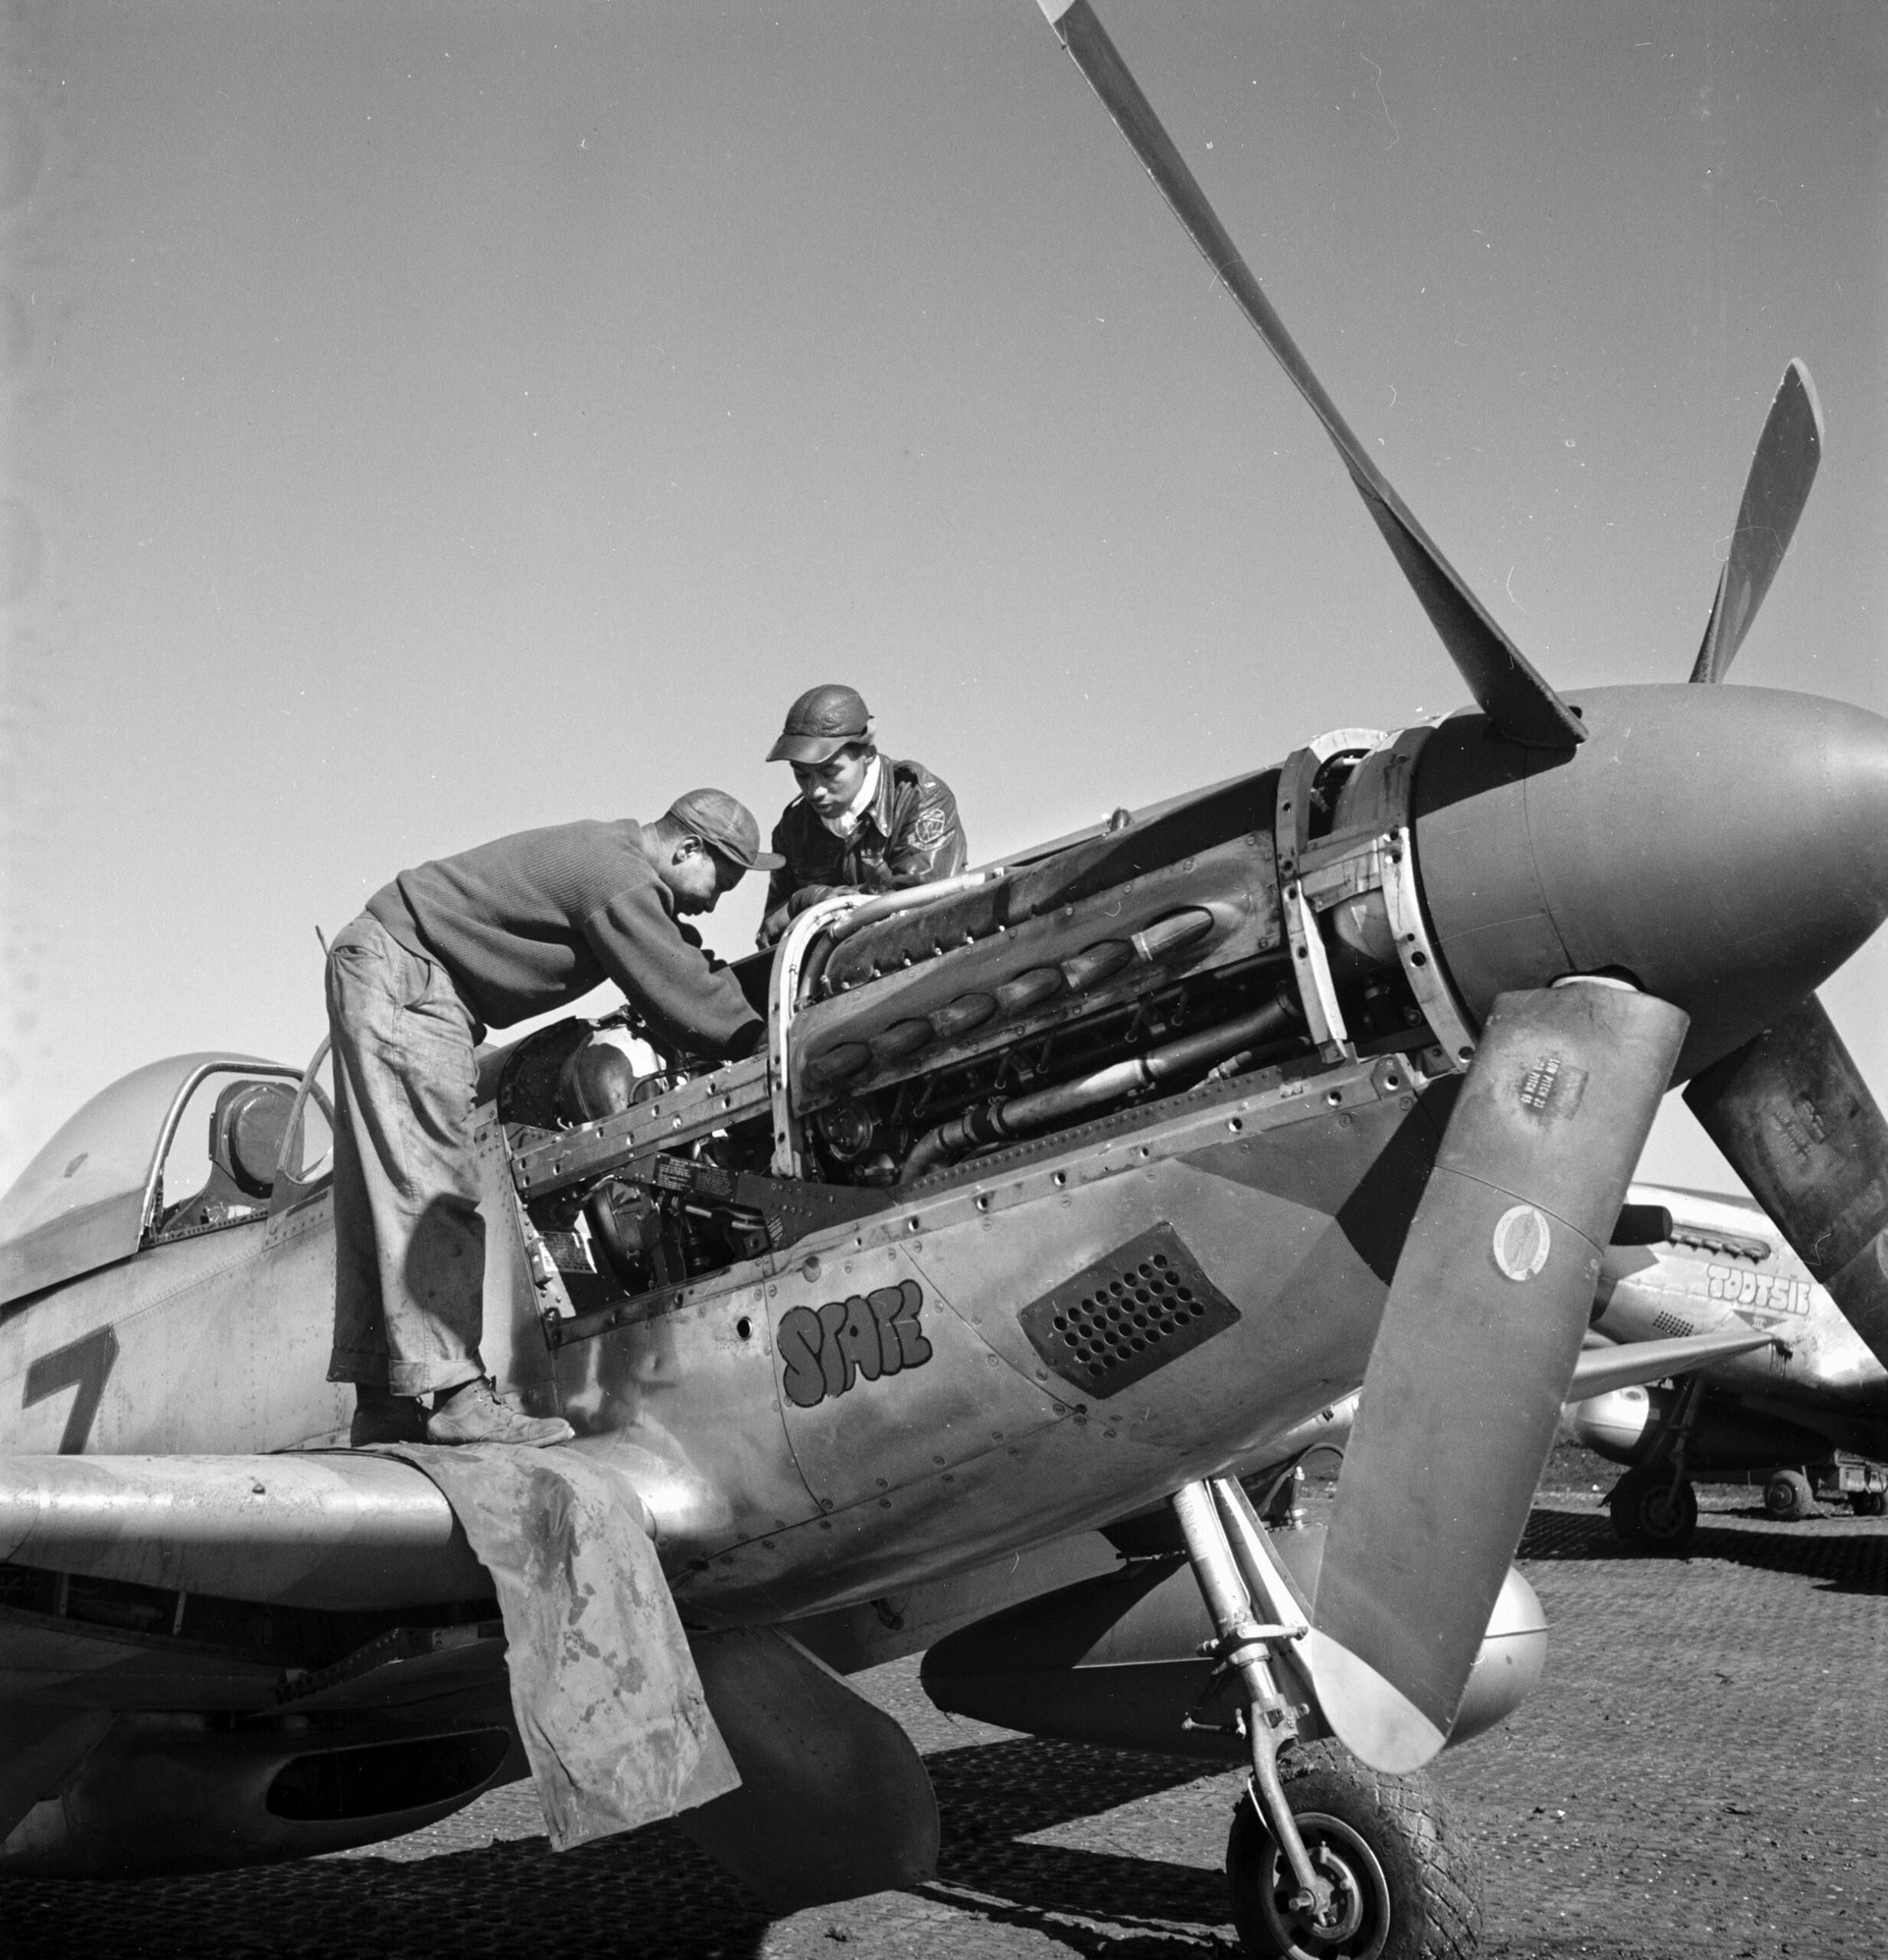 Lieutenant Roscoe Brown, right, observes as mechanic Marcellus G. Smith works on the engine of Brown’s P-51 Mustang “Tootsie" before a mission at the 15th Air Force Base at Ramitelli, Italy, March 1945.